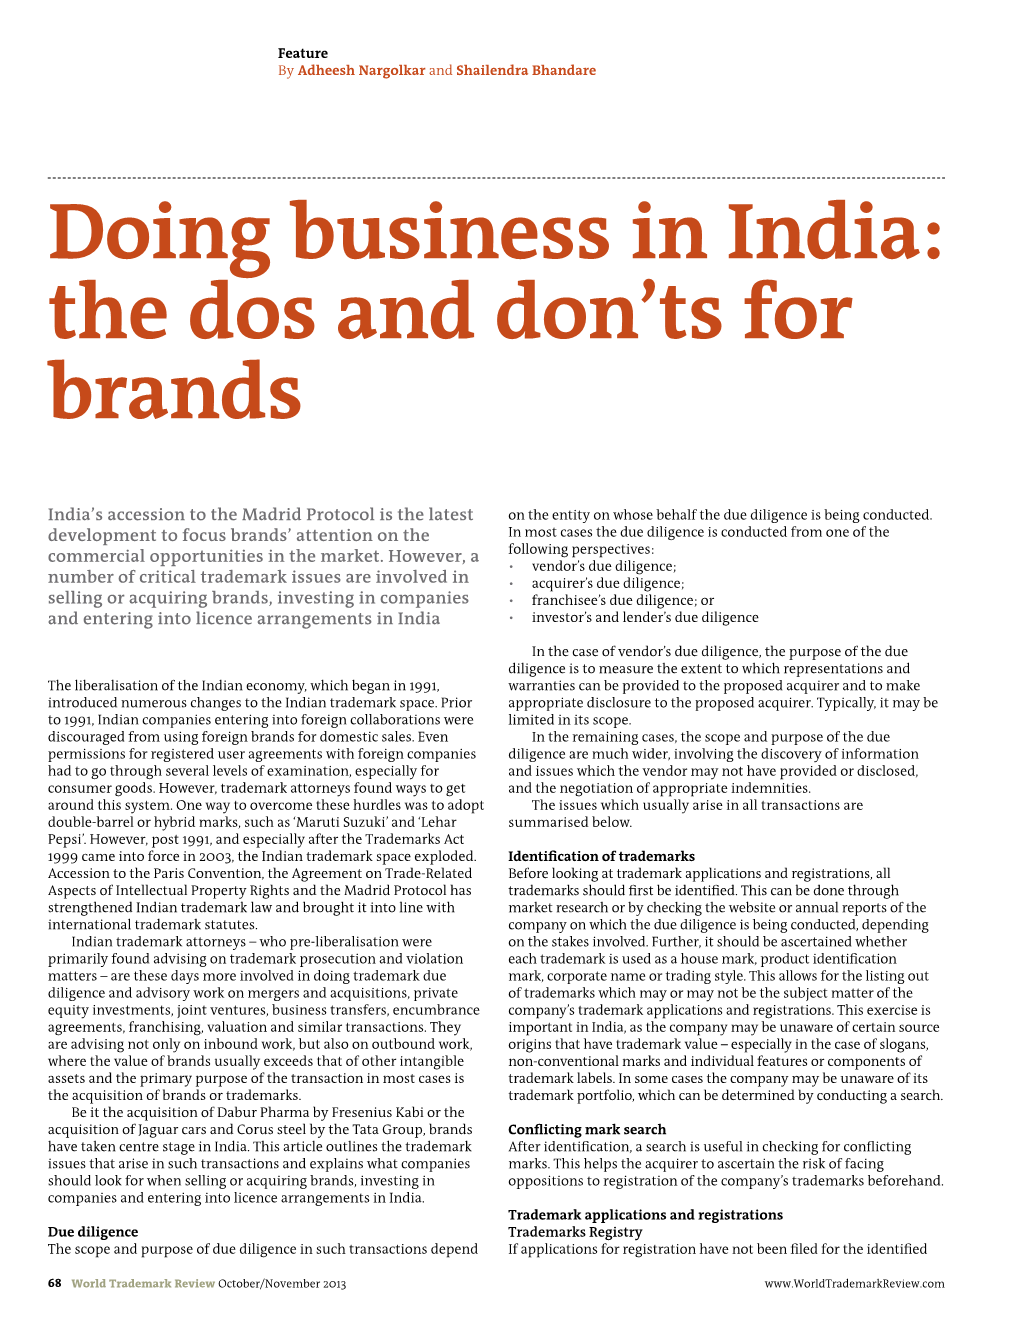 Doing Business in India: the Dos and Don'ts for Brands